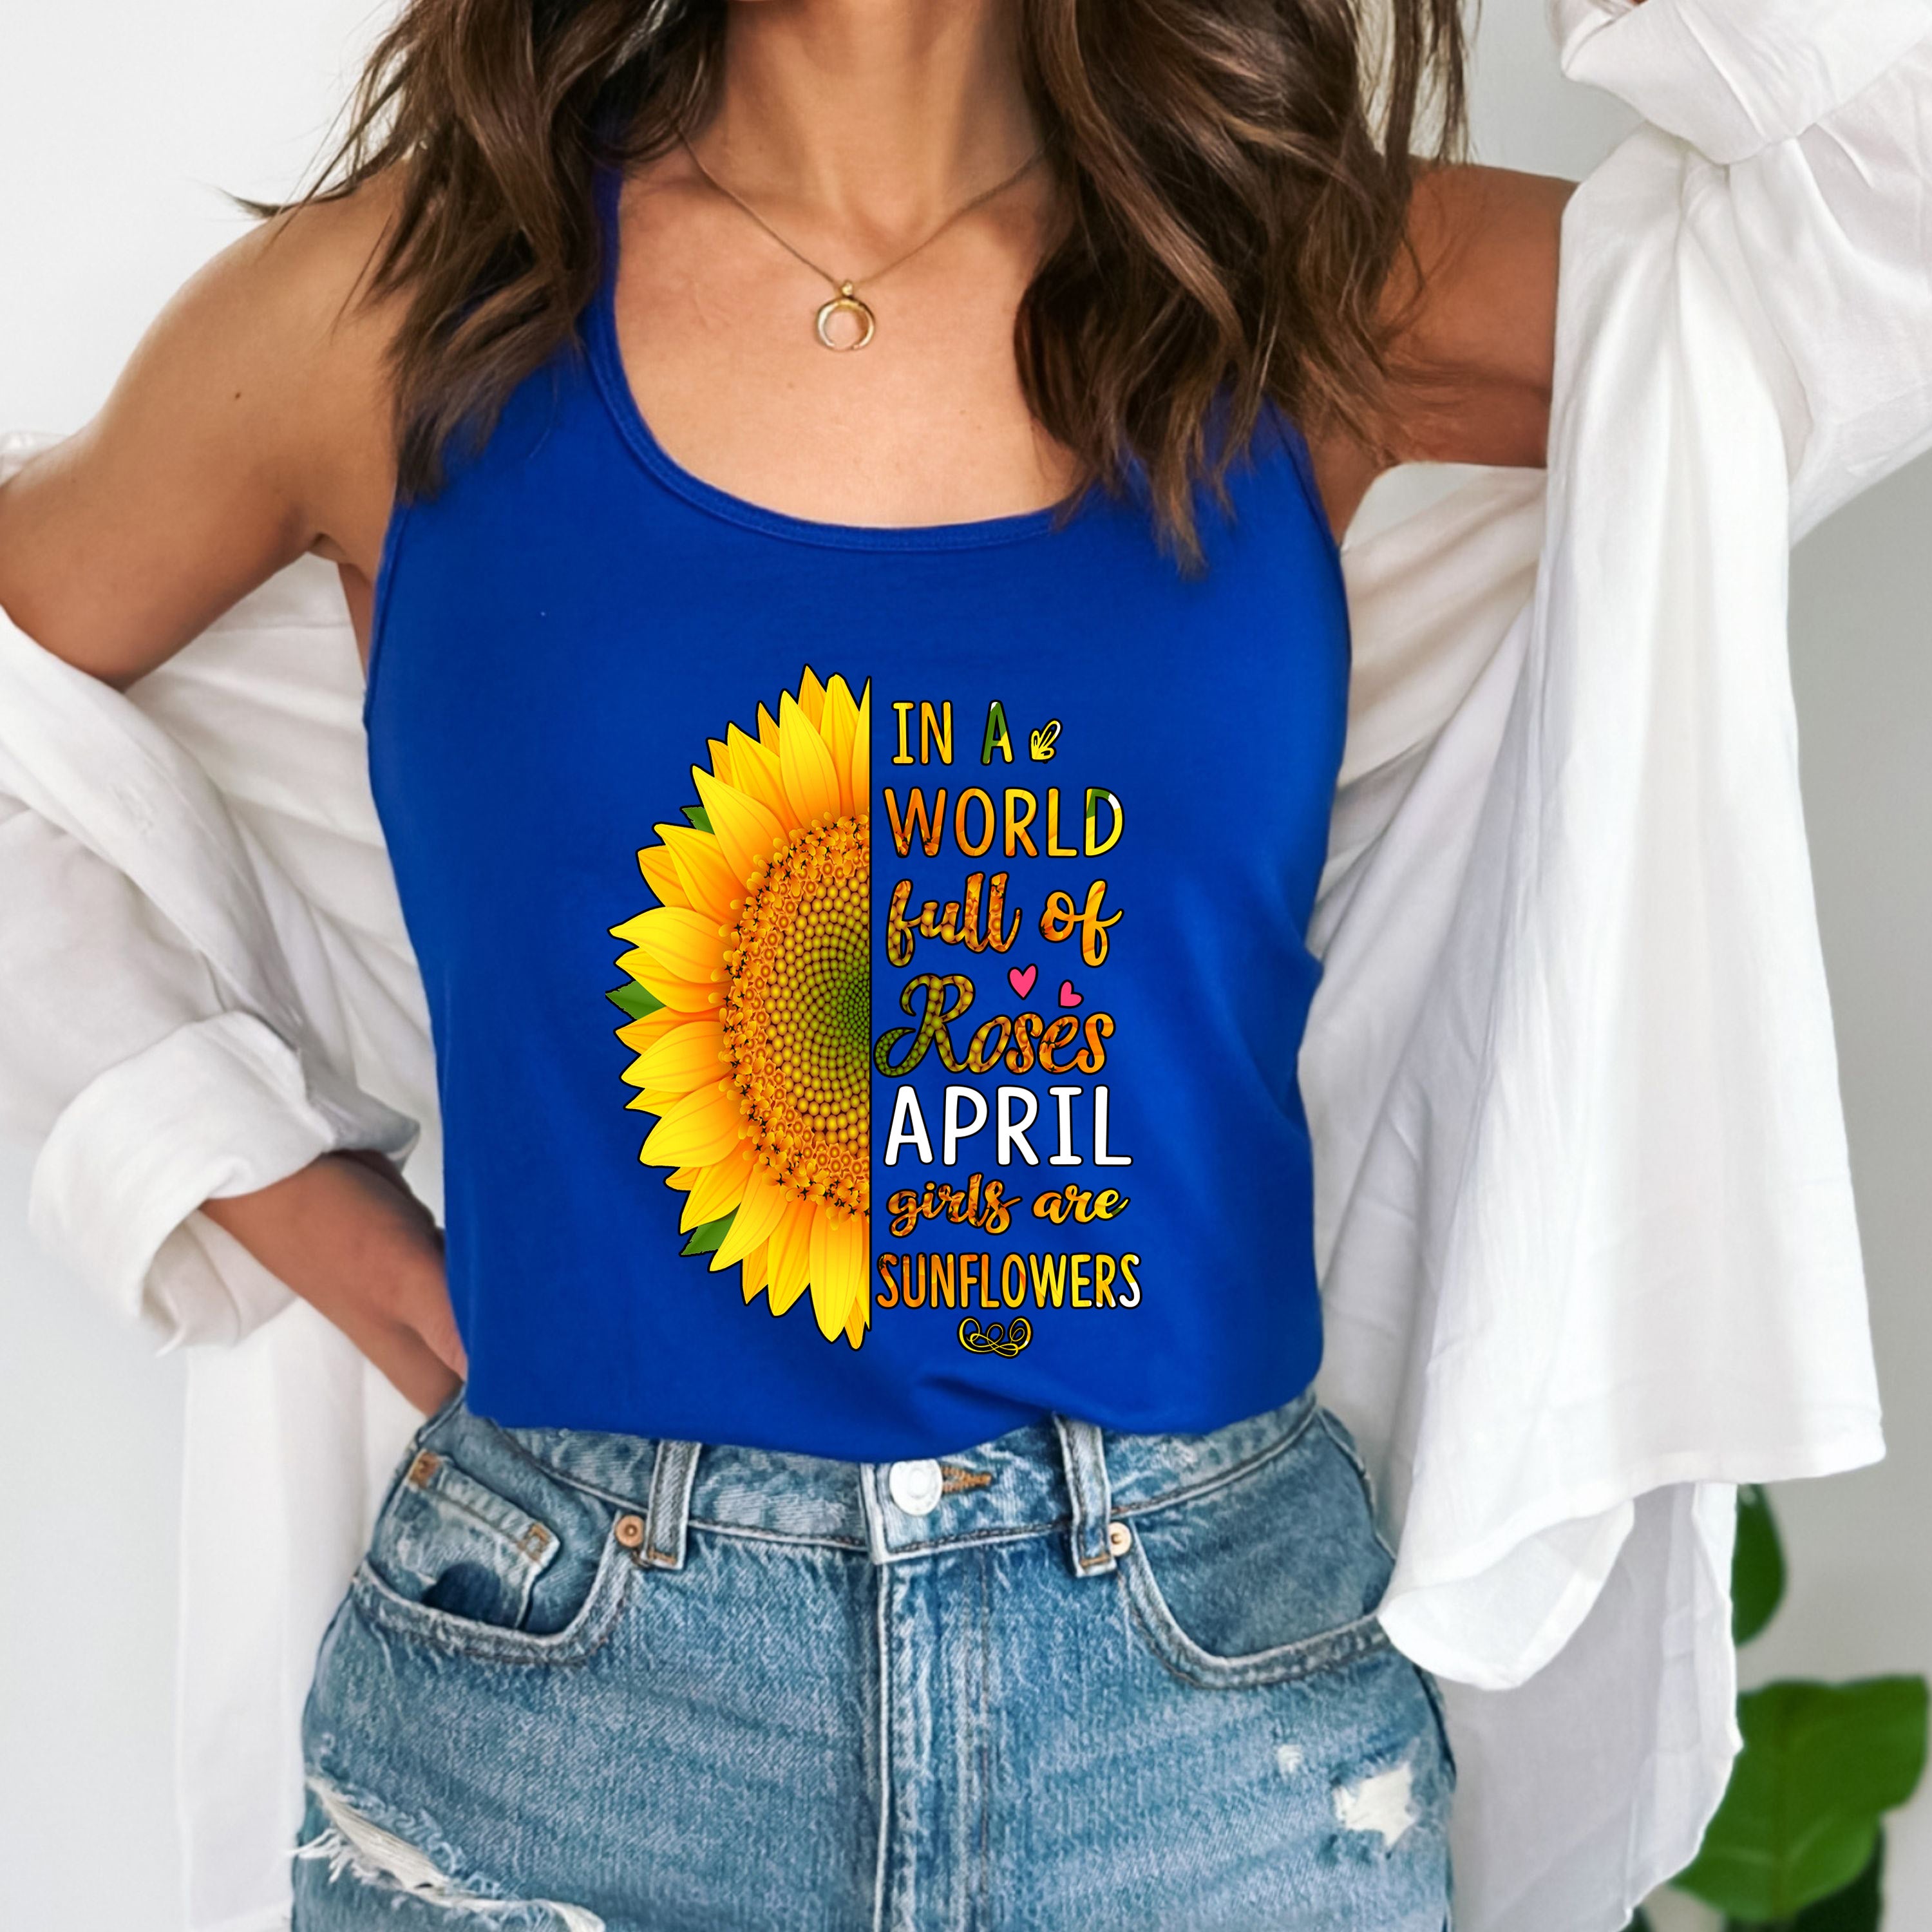 "In a world full of roses April girls are Sunflowers"